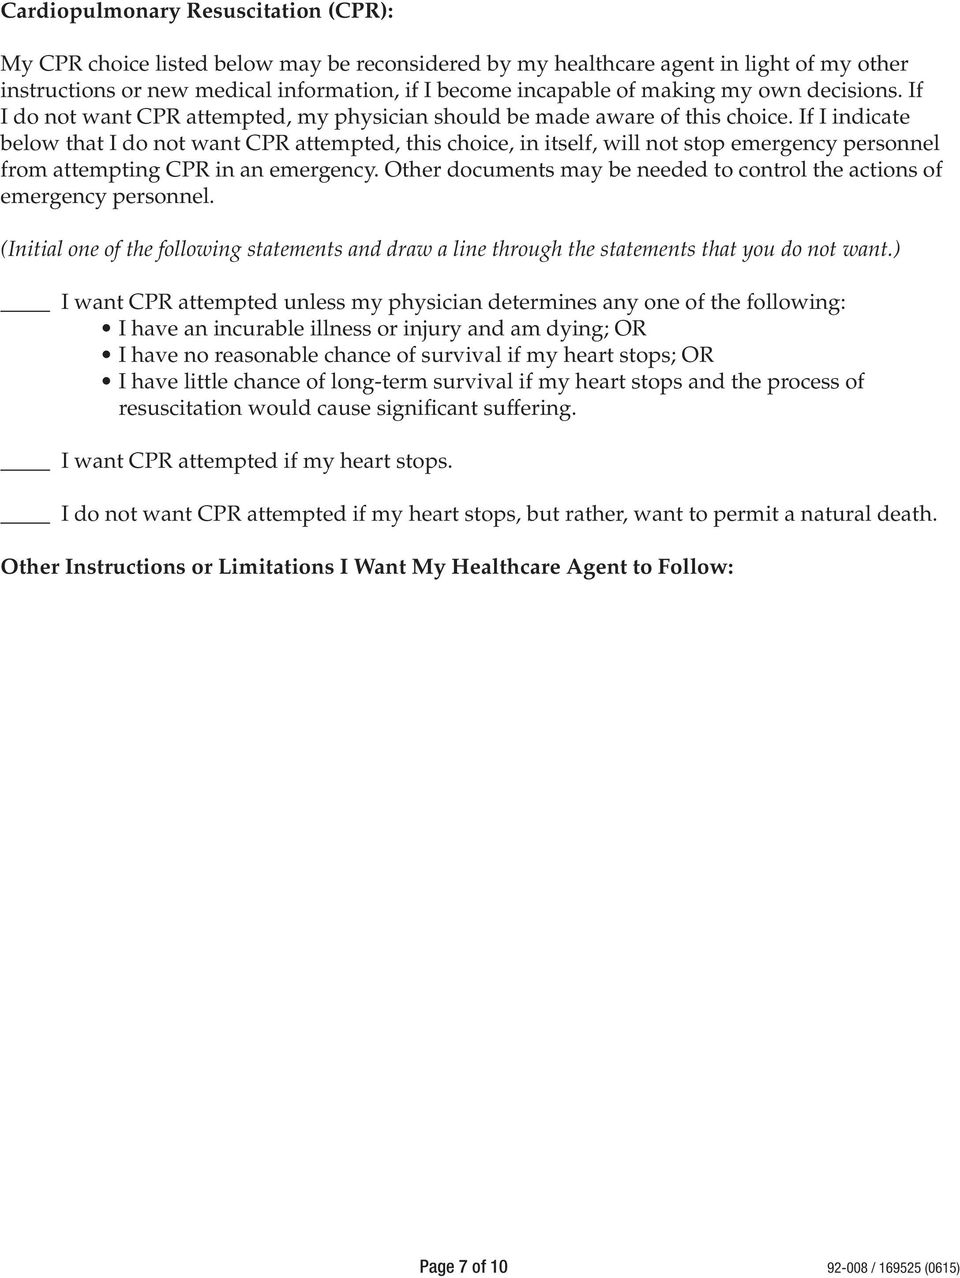 If I indicate below that I do not want CPR attempted, this choice, in itself, will not stop emergency personnel from attempting CPR in an emergency.